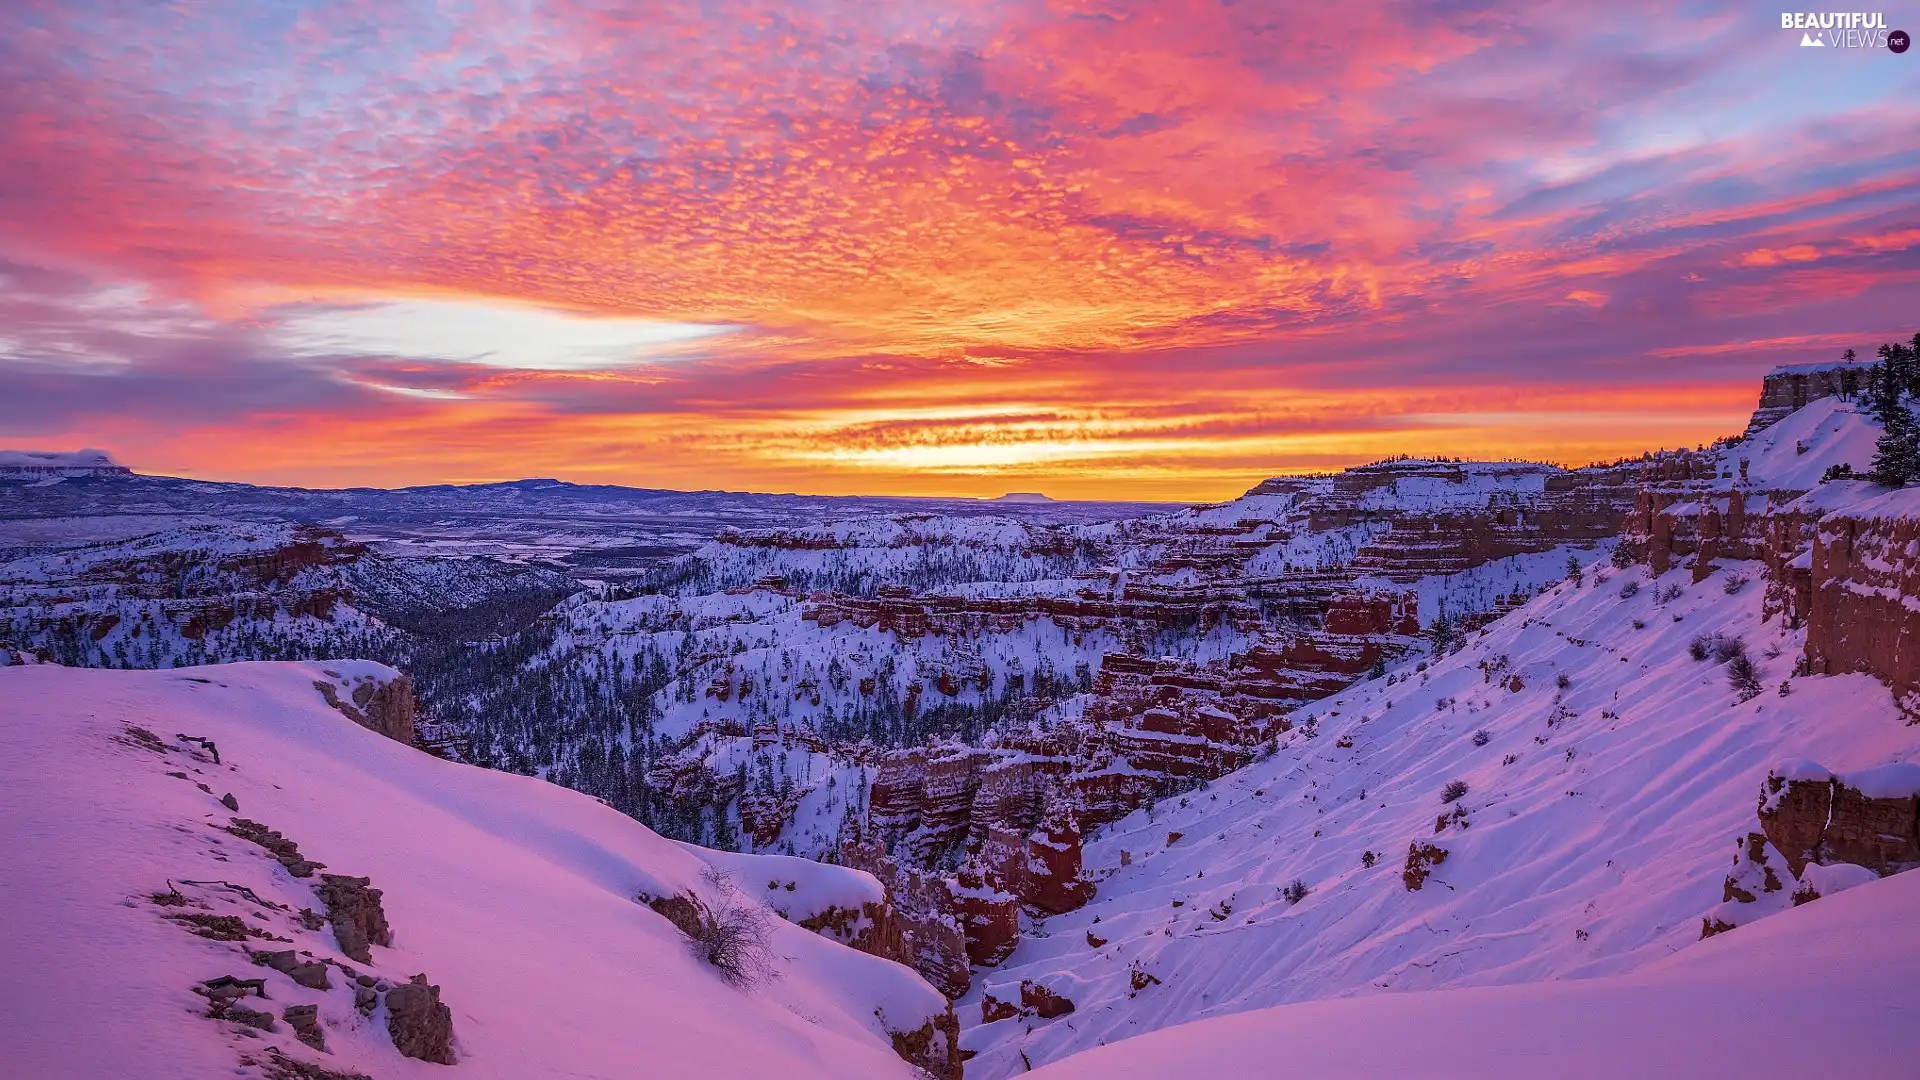 rocks, Utah State, Great Sunsets, Bryce Canyon National Park, The United States, winter, clouds